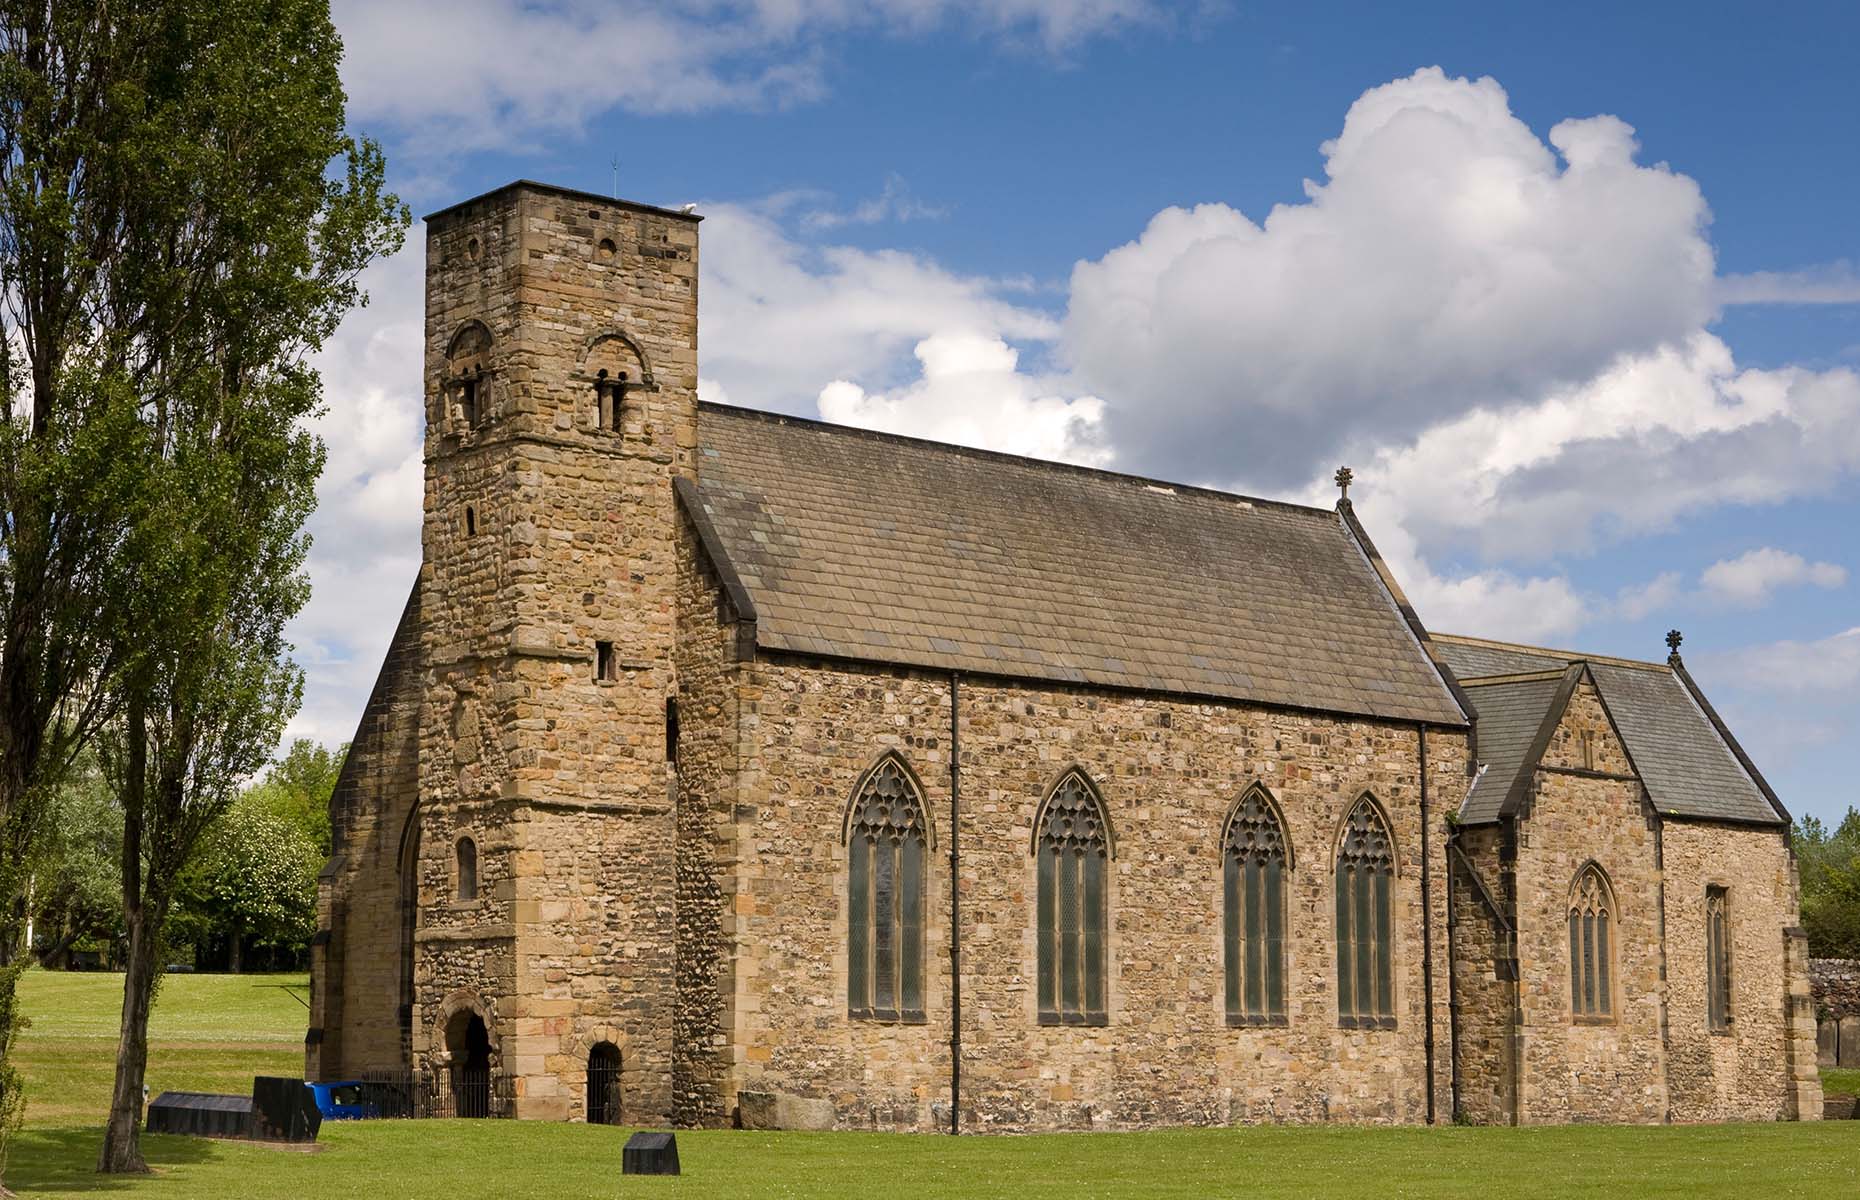 St Peter's Church in Sunderland (Image: Roger Coulam/Alamy Stock Photo)